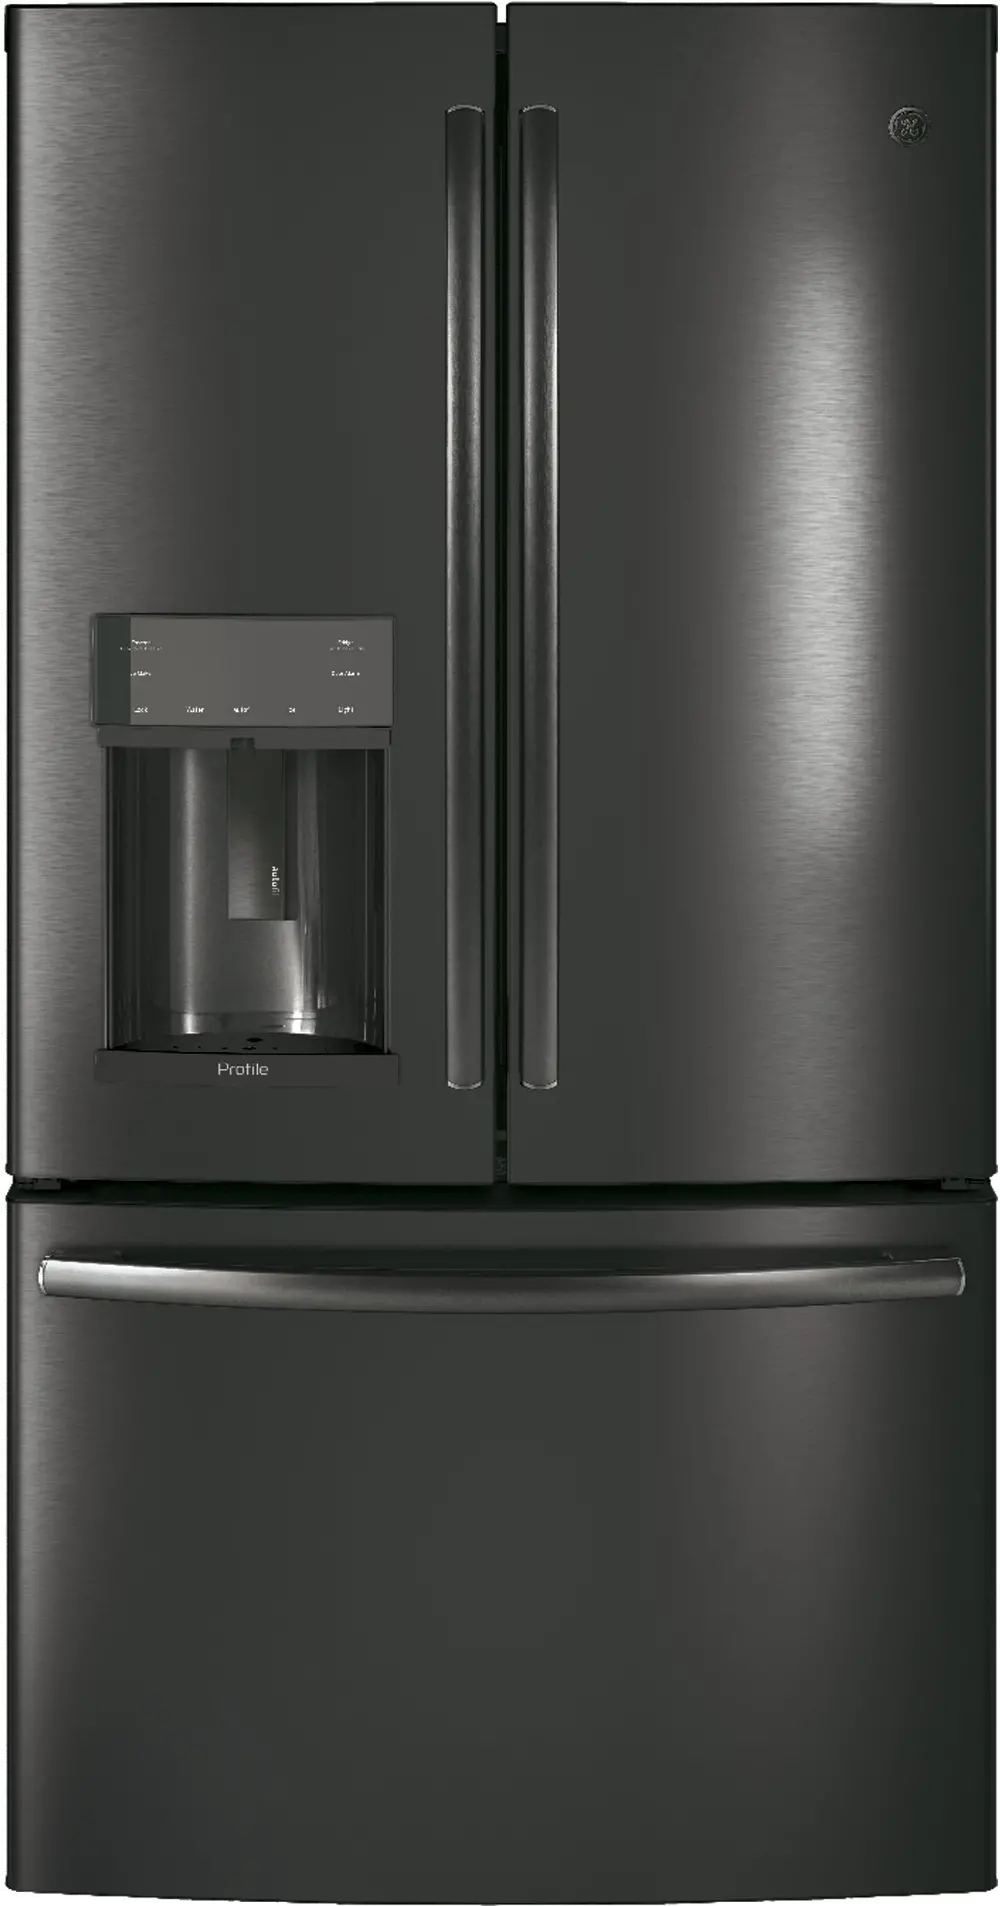 PFE28KBLTS GE Profile 27.8 cu ft French Door Refrigerator - Black Stainless Steel-1